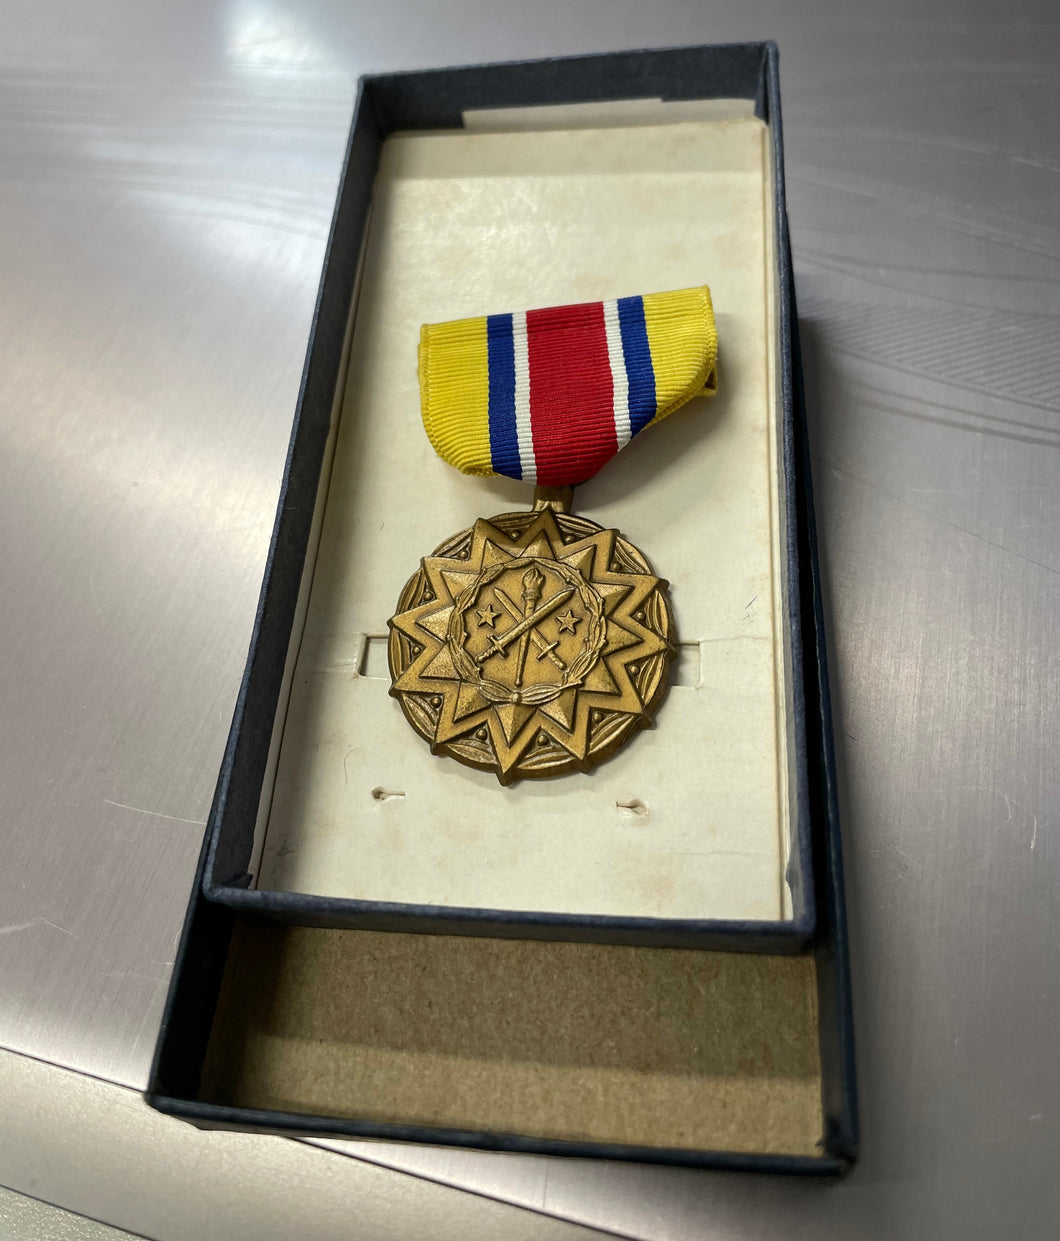 FRONT VIEW OF NATIONAL GUARD MEDAL IN BOX